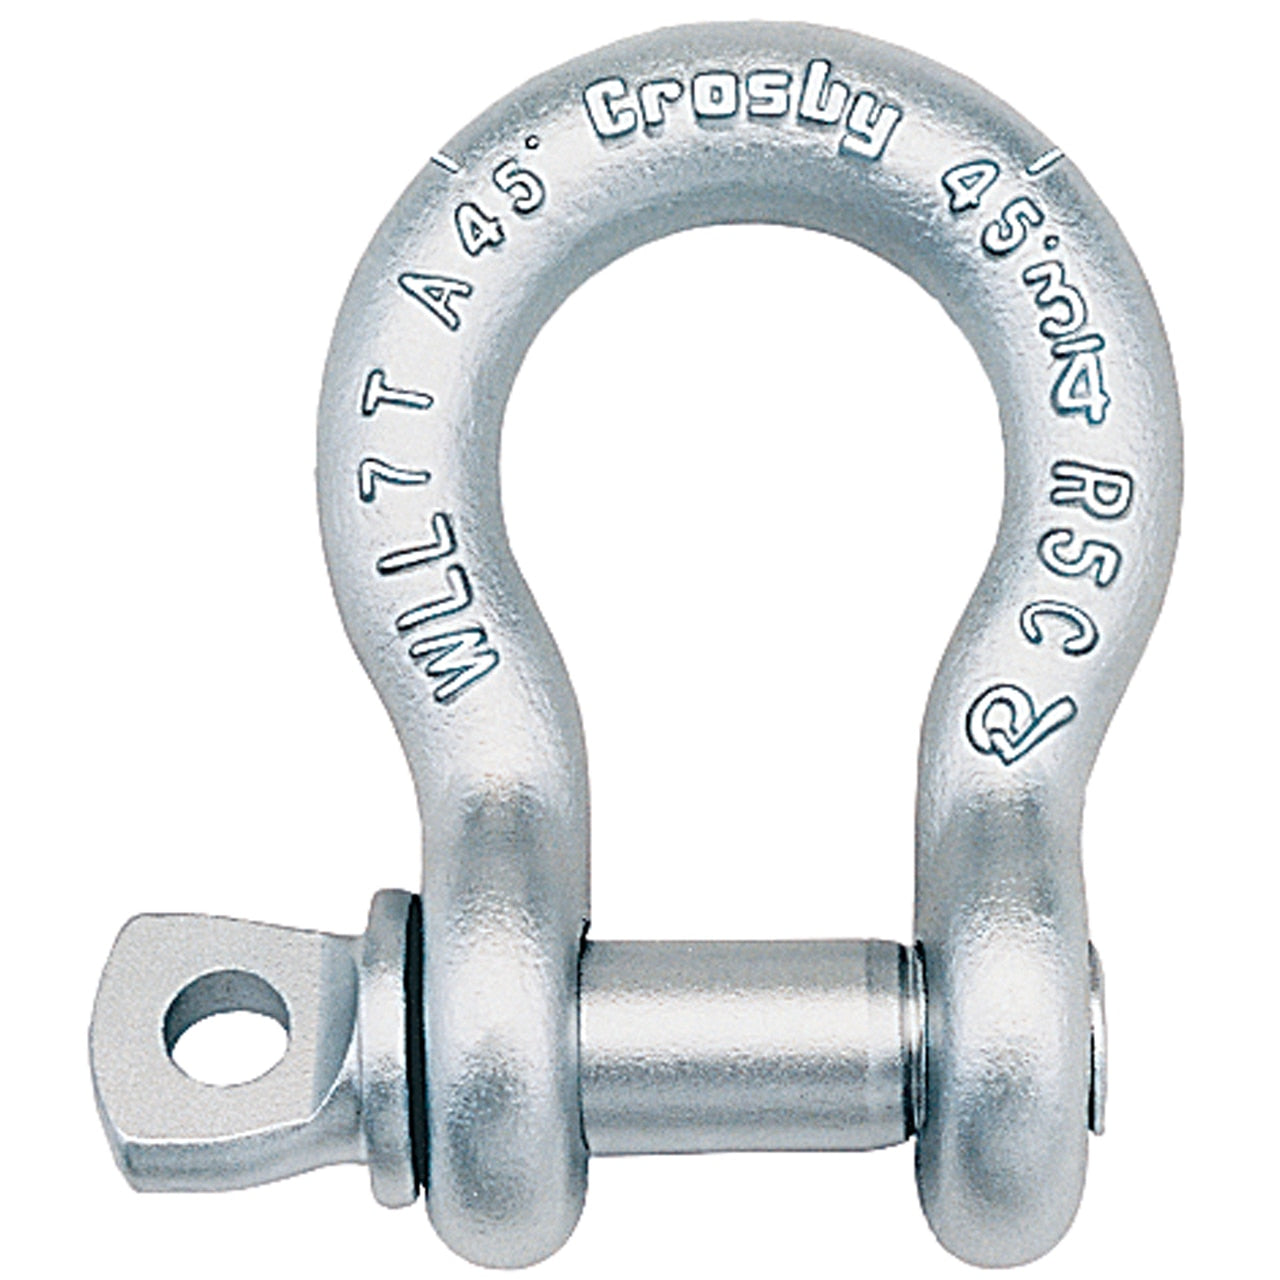 The Crosby G-209A Alloy Screw Pin Anchor Shackle has a higher rating than the standard G-209 due to the fact that it's made with Alloy Steel.   